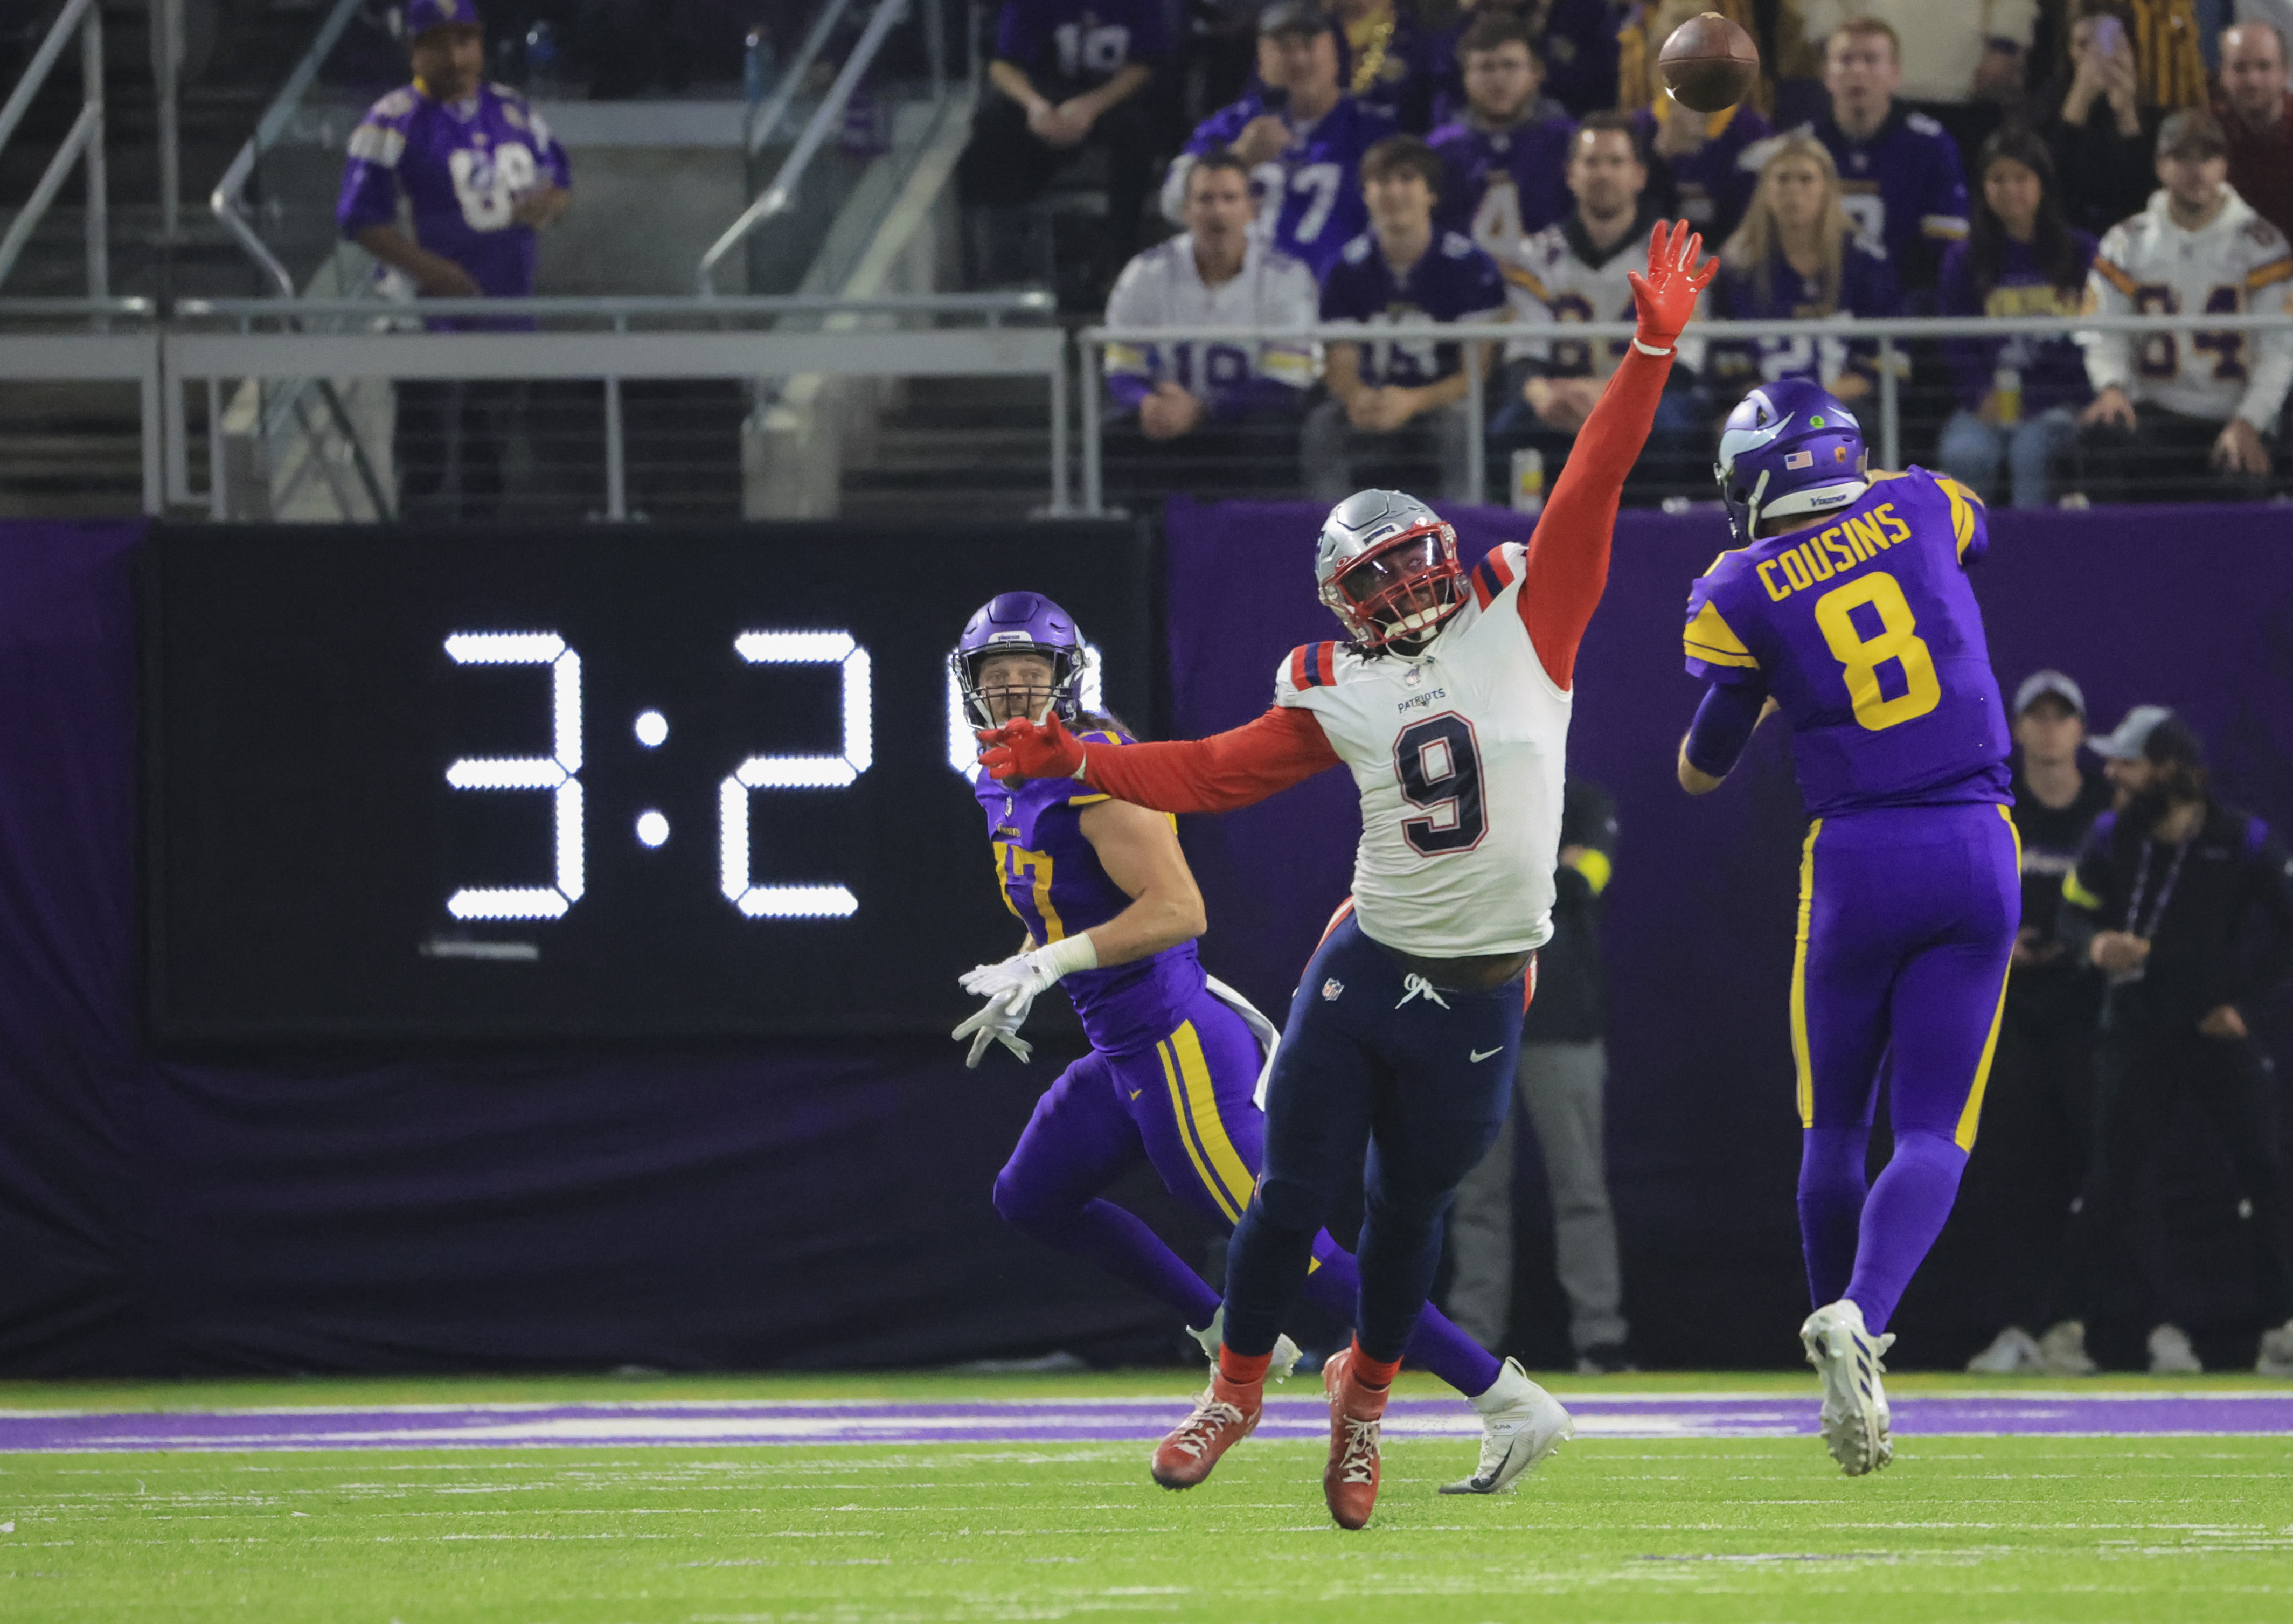 Vikings vs. Patriots will be MN's first Thanksgiving home game